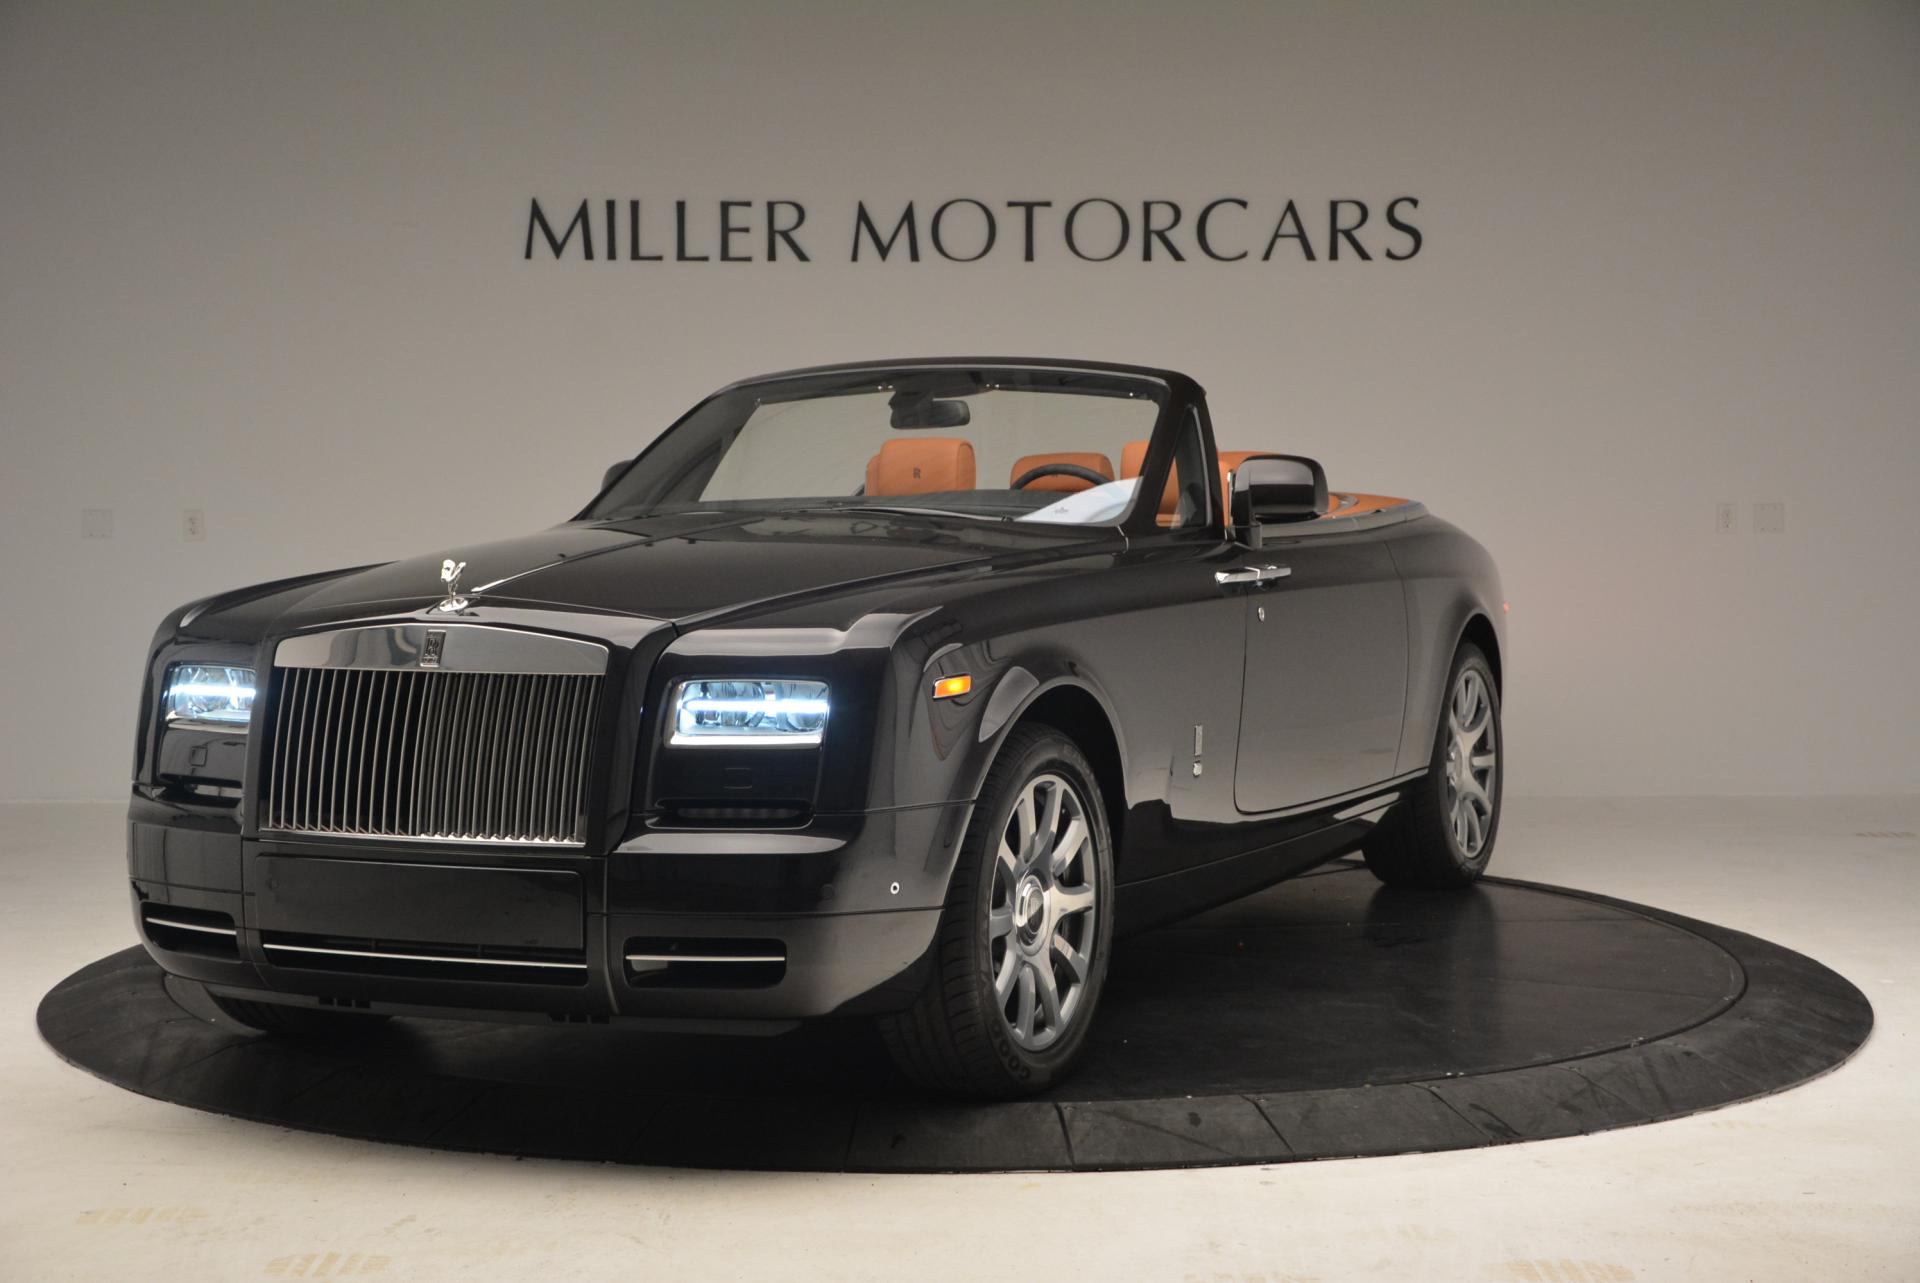 New 2016 Rolls-Royce Phantom Drophead Coupe Bespoke for sale Sold at Bugatti of Greenwich in Greenwich CT 06830 1